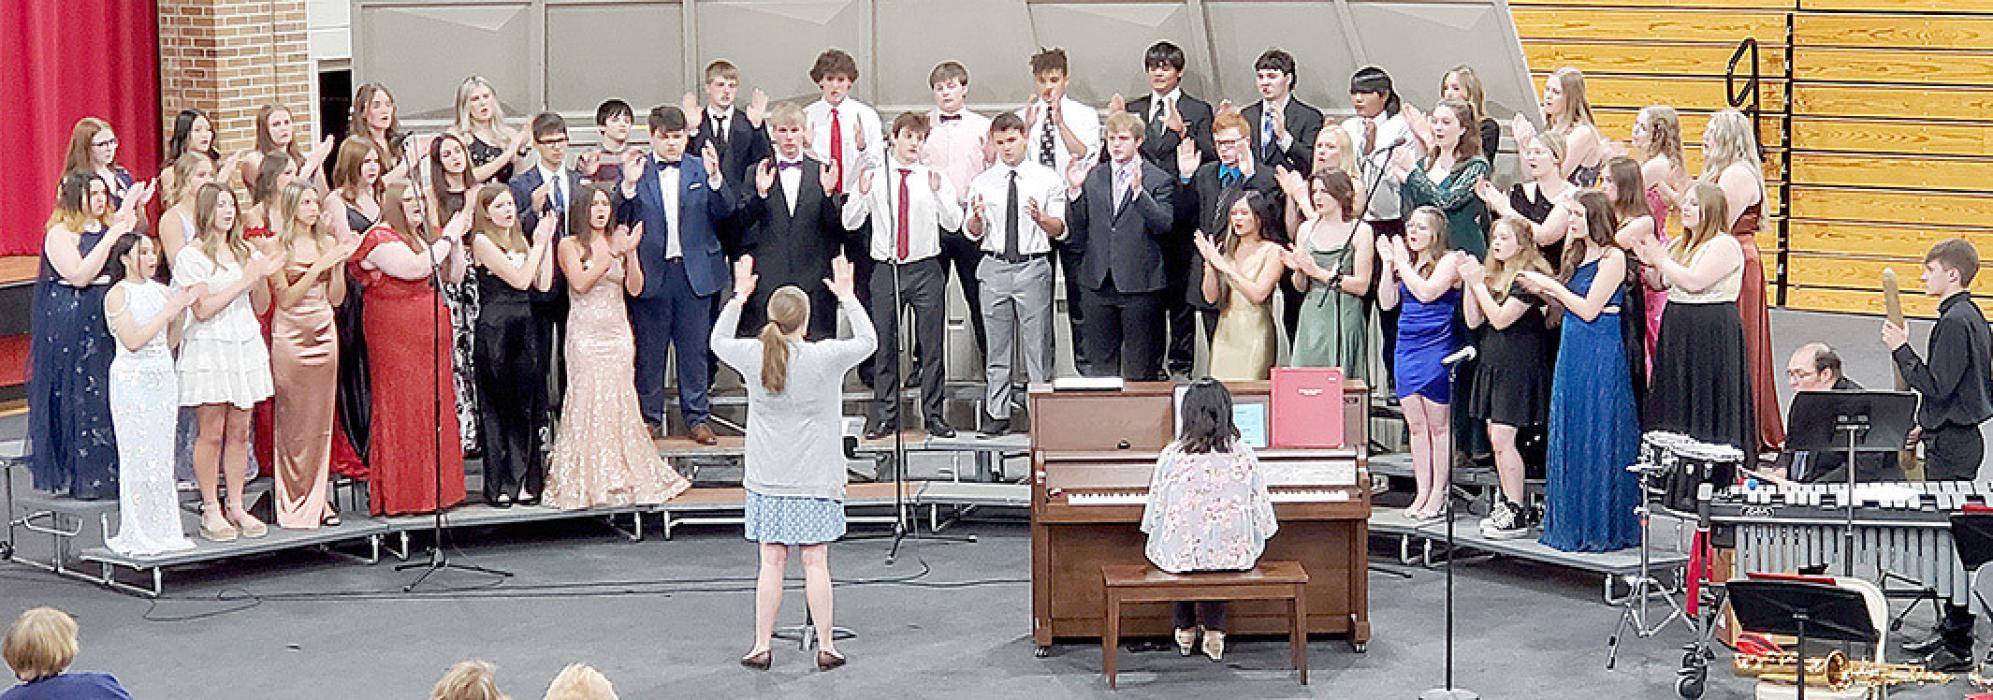 The high school choir performed a wide variety of genres, starting the evening with piece freely based on three Brazilian tribal songs, moved into a familiar Irish song, “Danny Boy,” a song of hope, “Ad Astra (To the Stars),” and concluded with a gospel hymn, “He Never Failed Me Yet.”